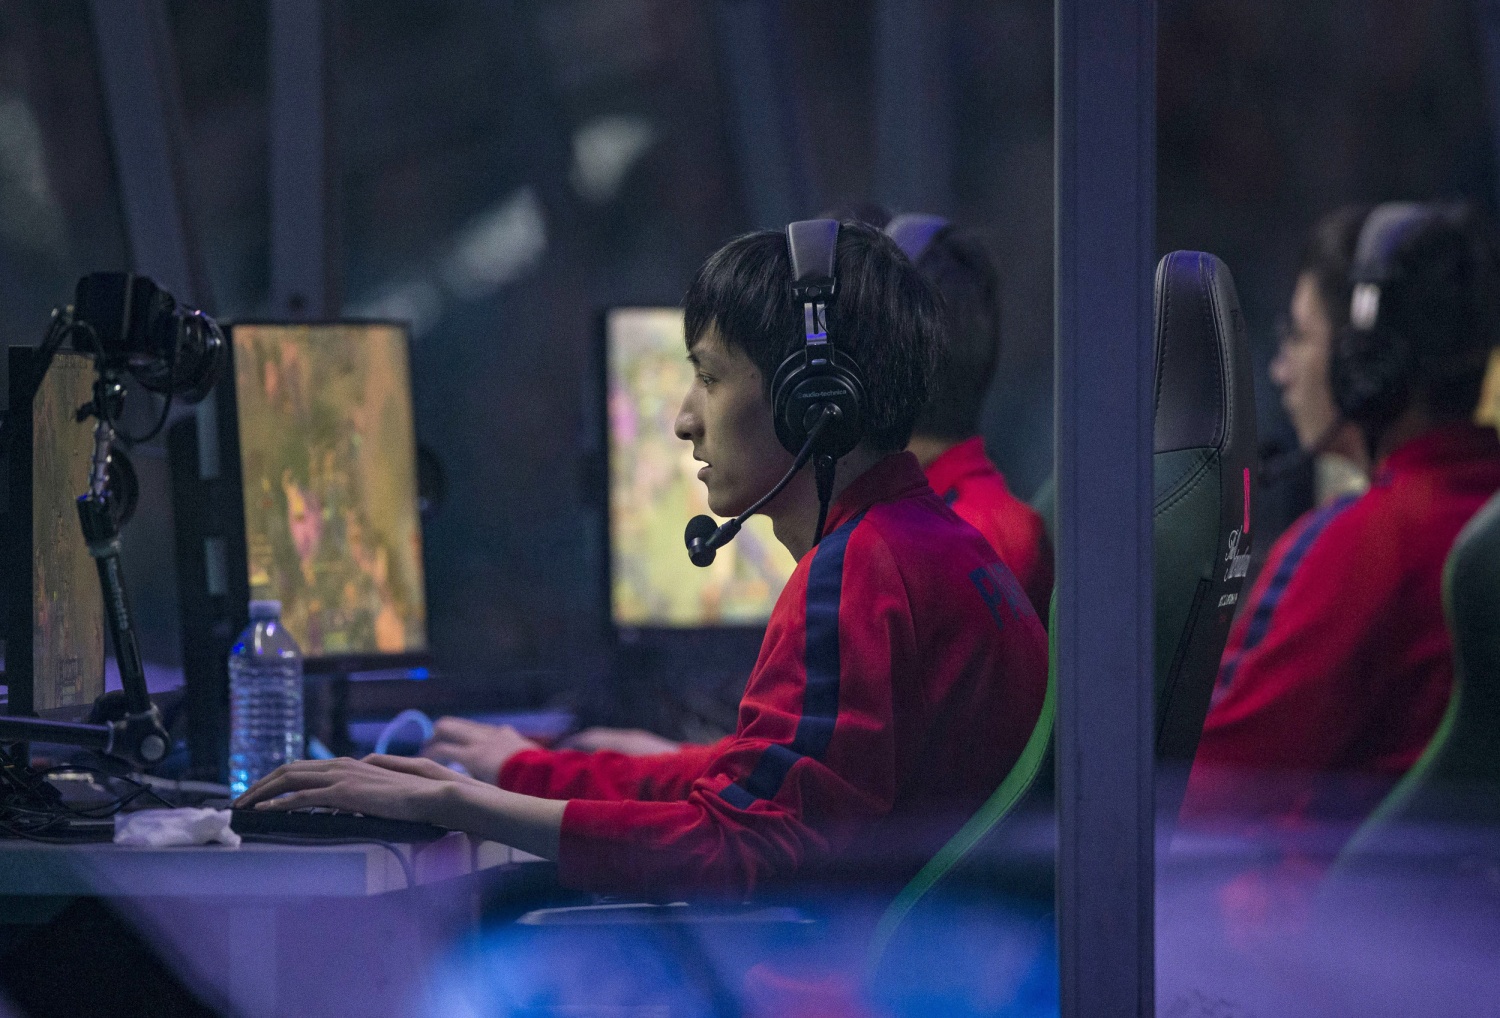 Top 'Live-Streamers' Get $50,000 an Hour to Play New Videogames